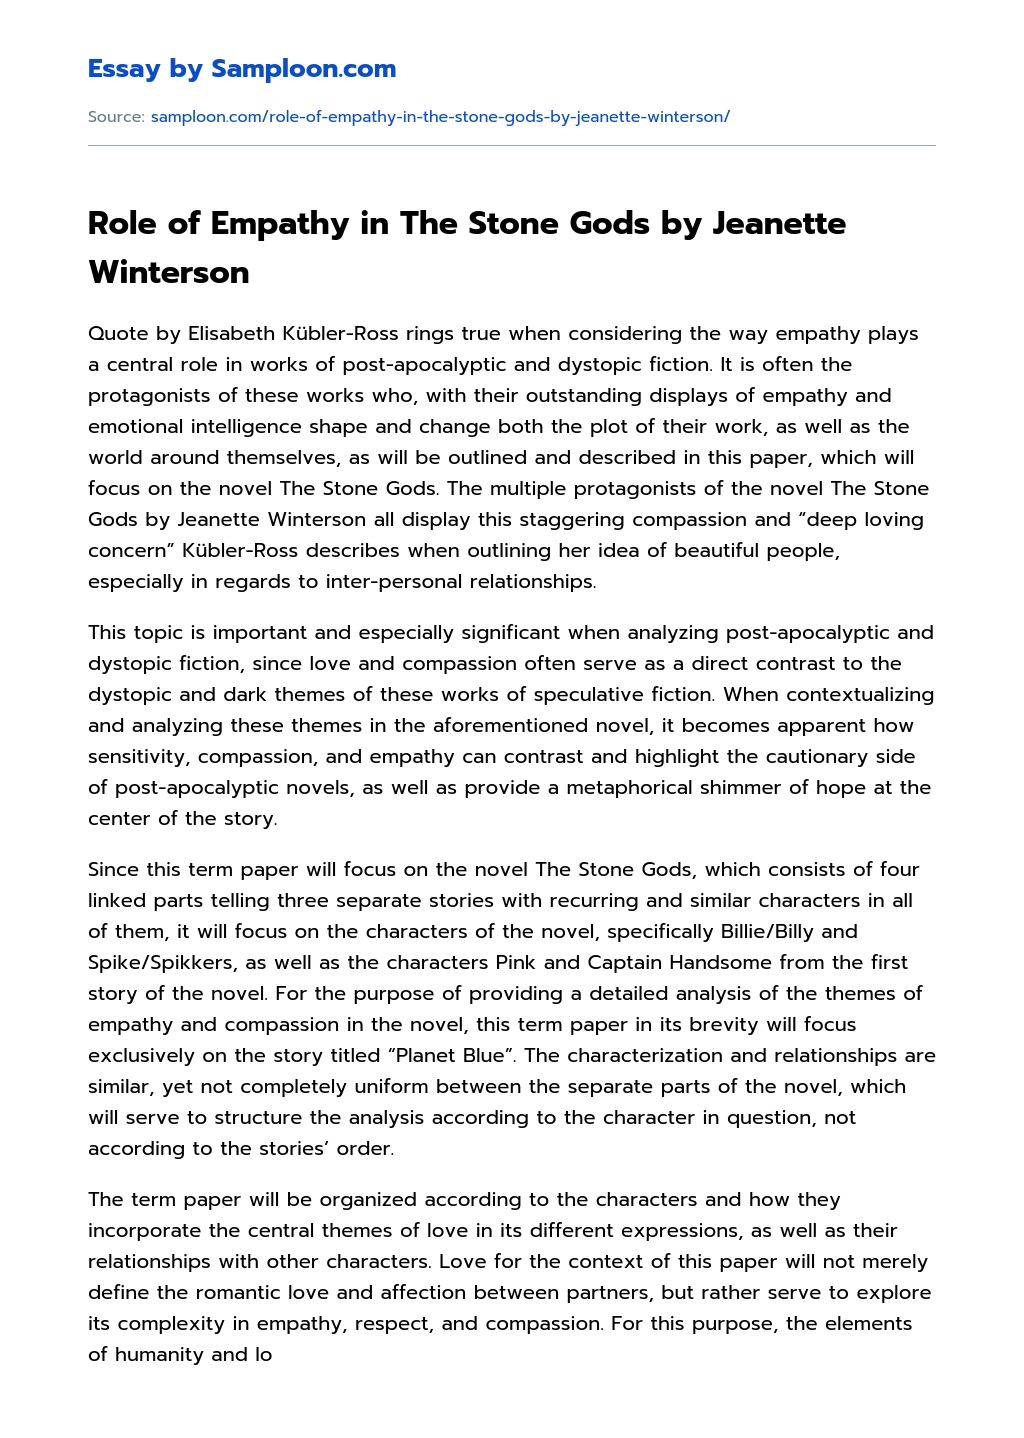 Role of Empathy in The Stone Gods by Jeanette Winterson Summary essay